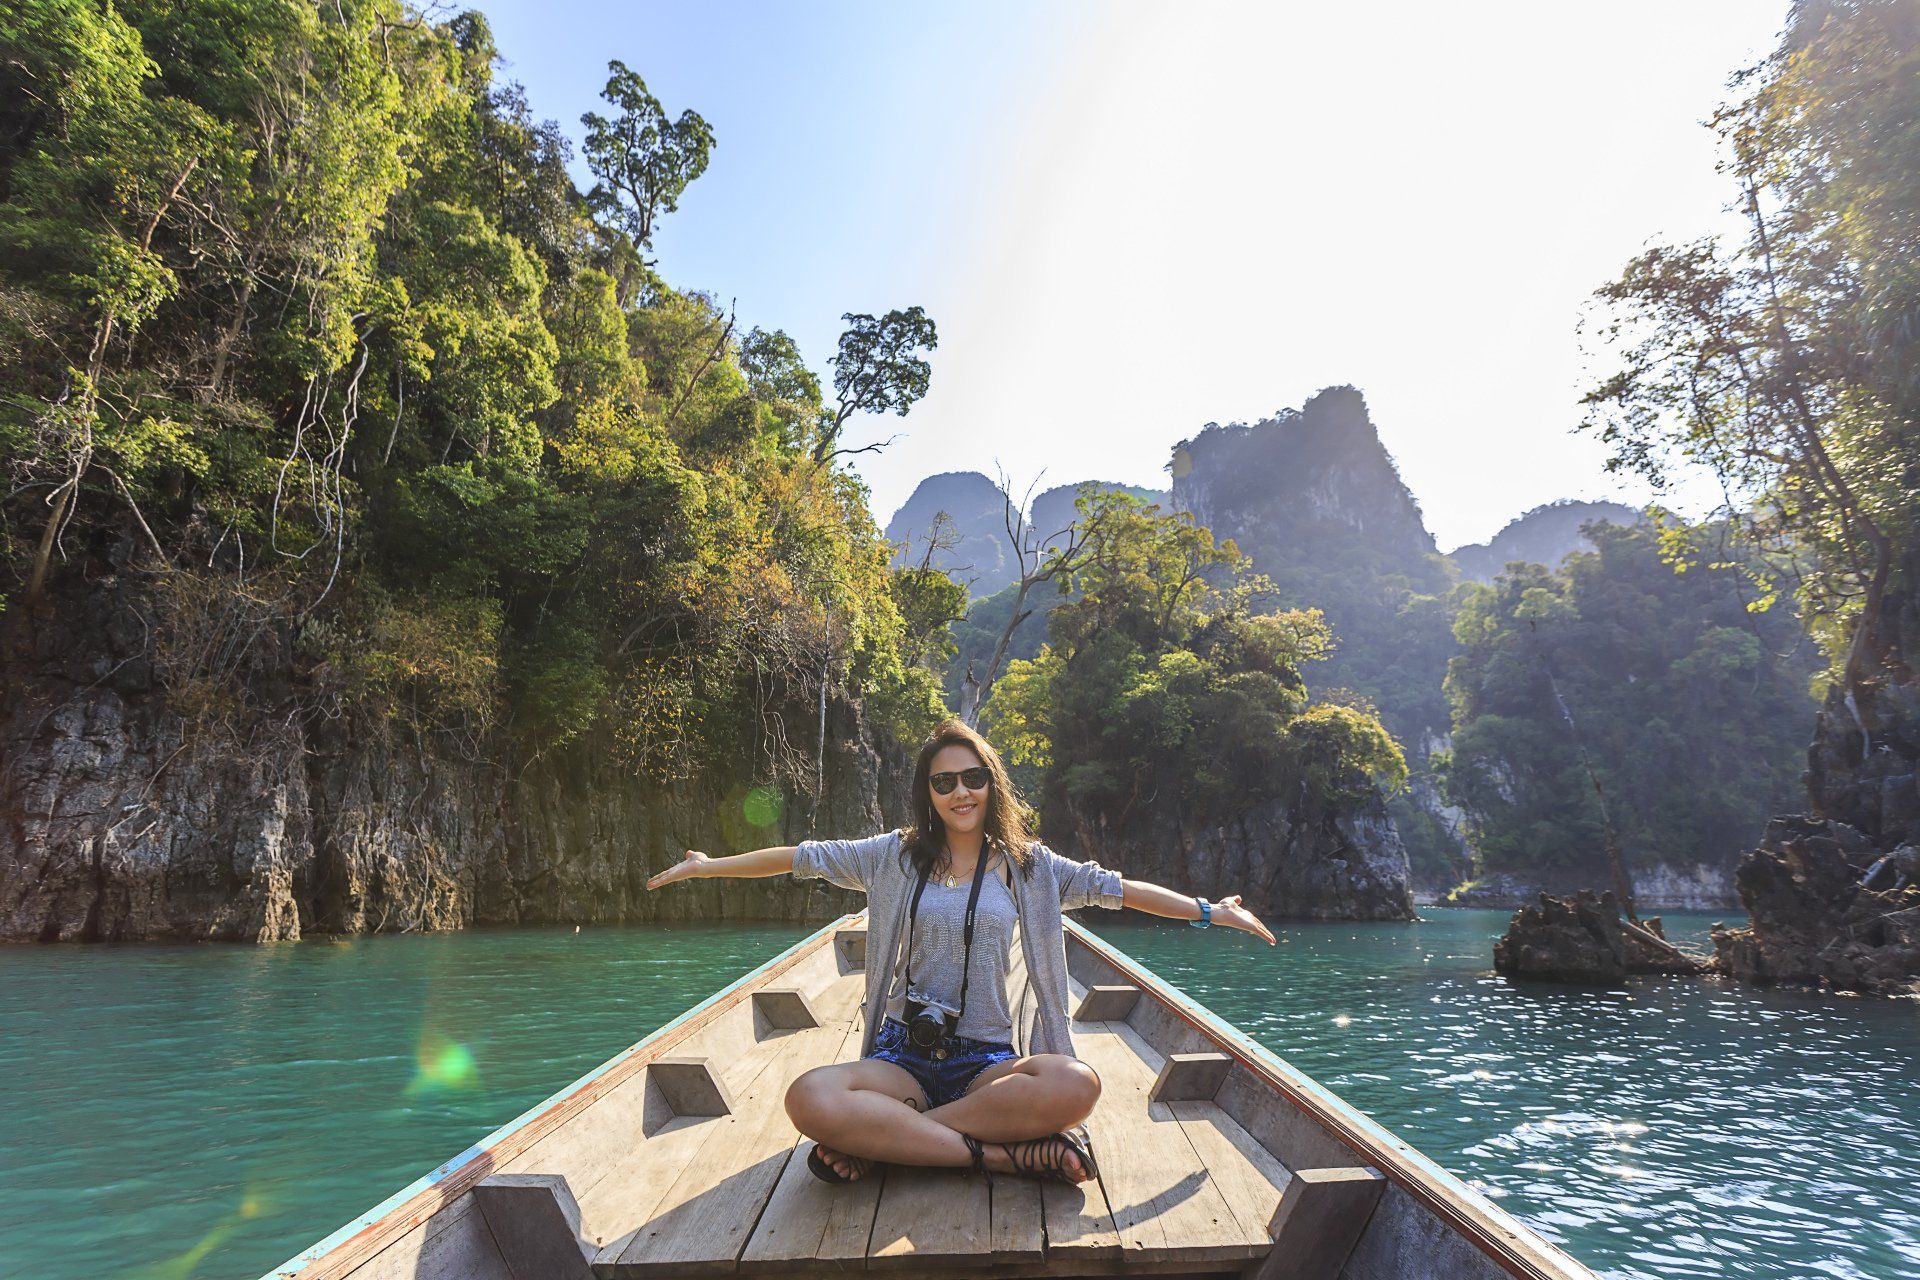 Happy Woman In a Small Boat in Khao Sok National Park, Thailand - Escorted Tours Barter's Travelnet